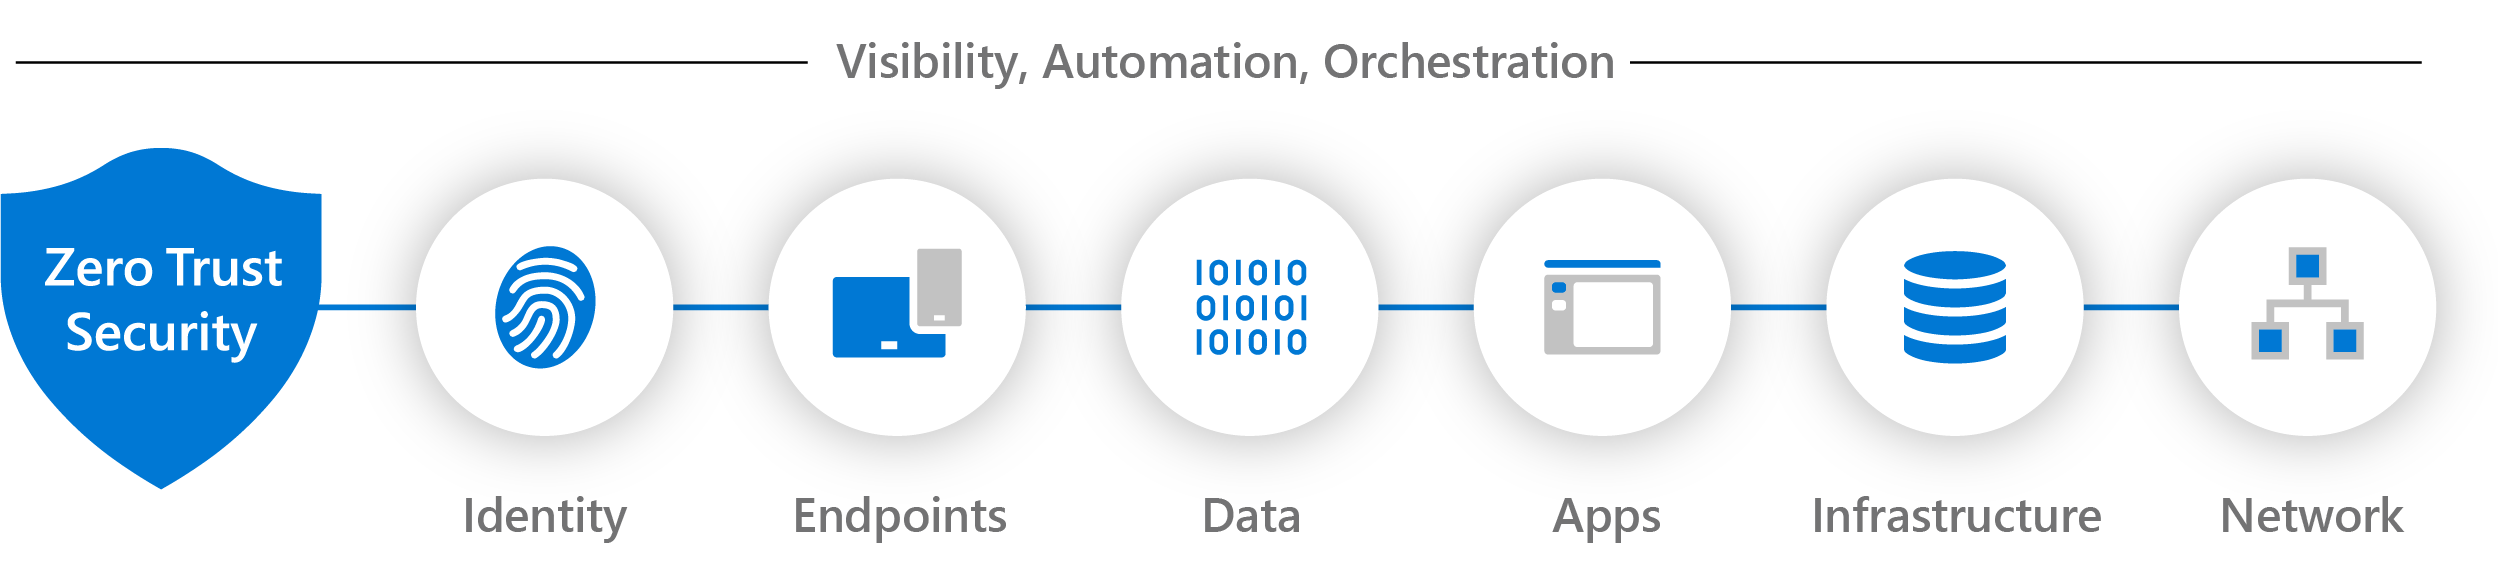 Diagram of elements of visibility, automation, and orchestration in Zero Trust.